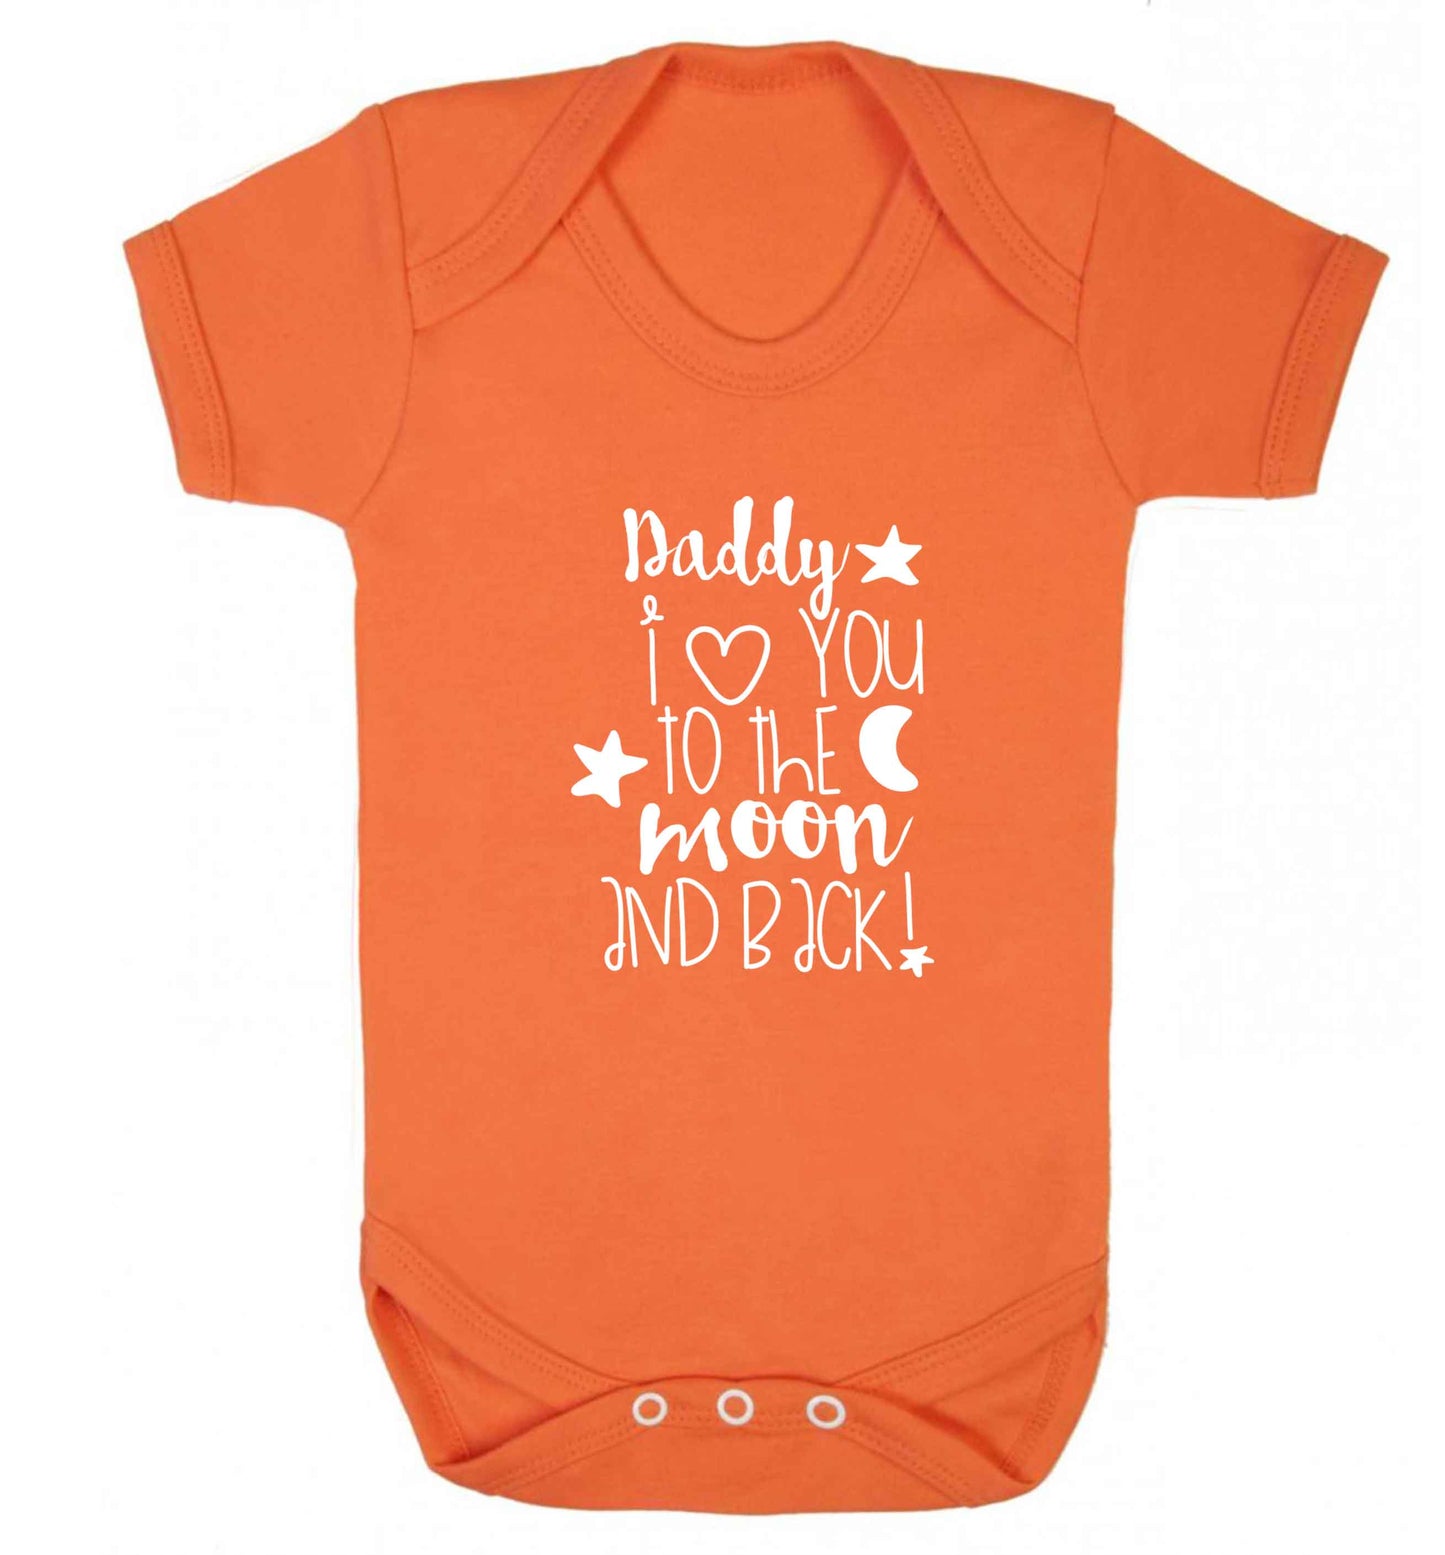 Daddy I love you to the moon and back baby vest orange 18-24 months